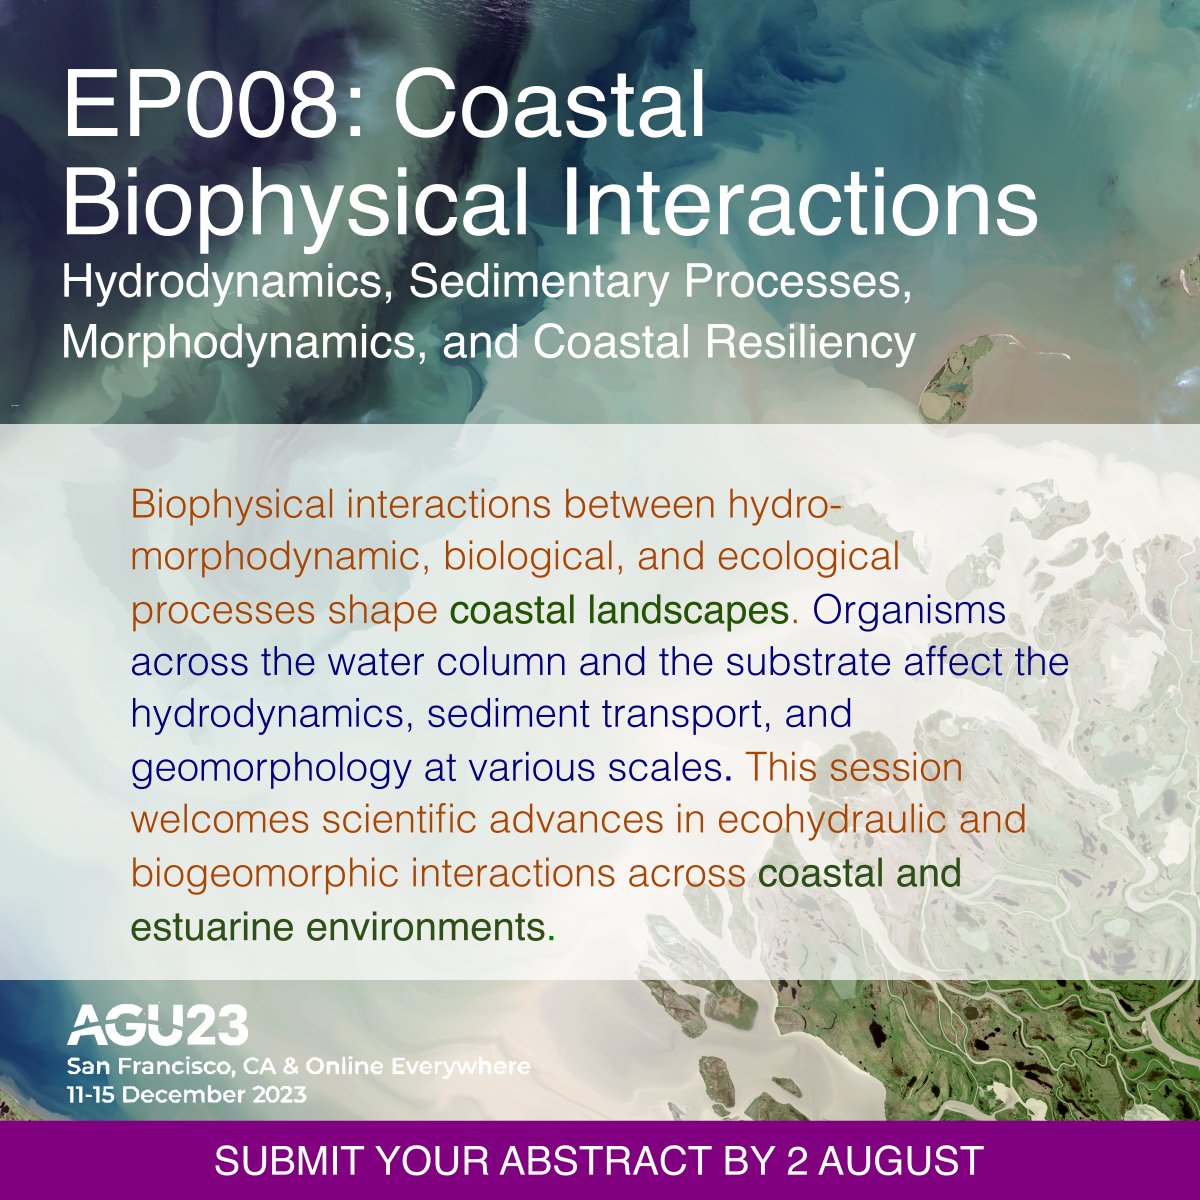 🌿🦐🪱🐟🐚🪸☁️🌊
Living 'things' shaping coastal 'things'...

Share your work in our session EP008 Coastal Biophysical Interactions @theAGU 
🗓️ Submit your abstract by 3 August! #AGU23 
👉 agu.confex.com/agu/fm23/preli…

@mbru42 @Salty_Serina @estuarinehydro